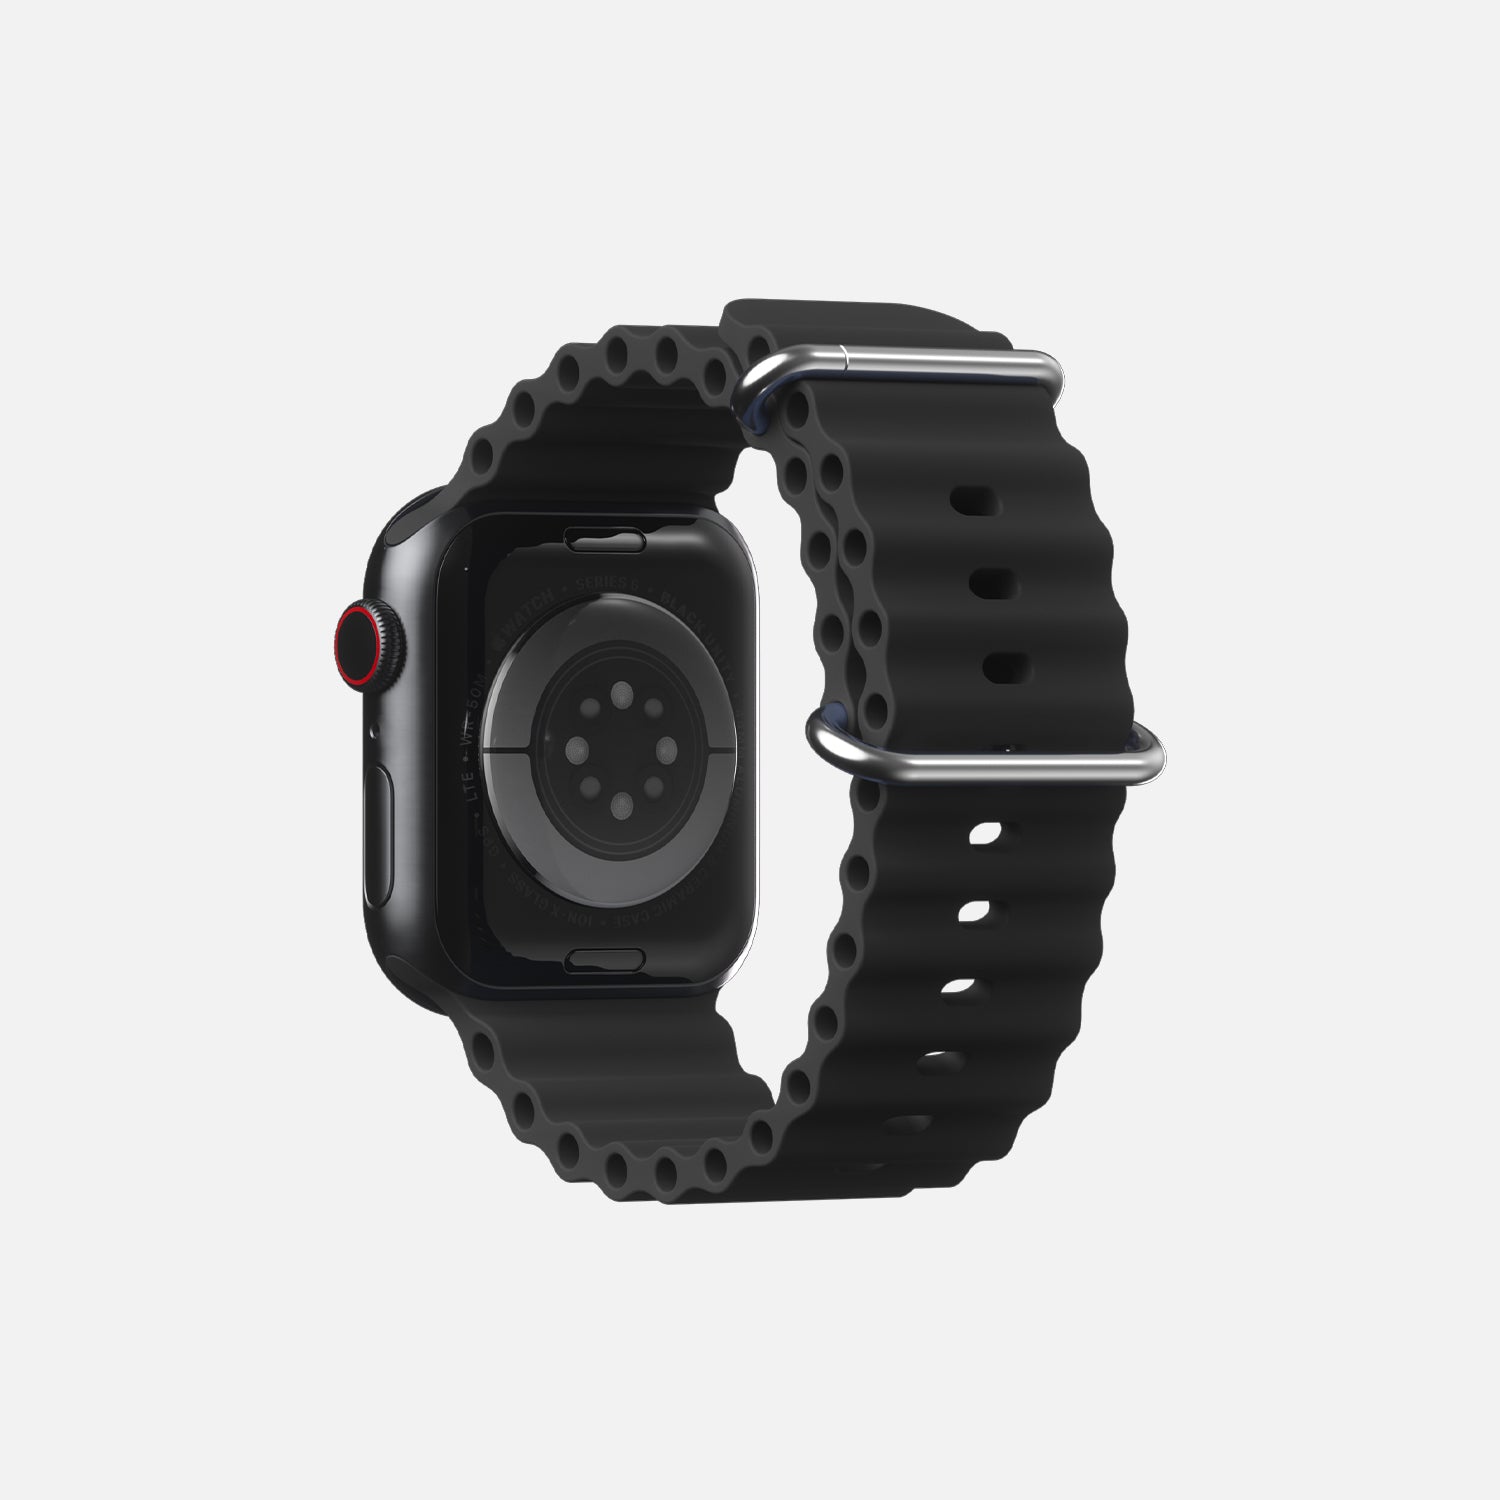 Rear view of a black Apple smartwatch with sport band and red digital crown on white background.